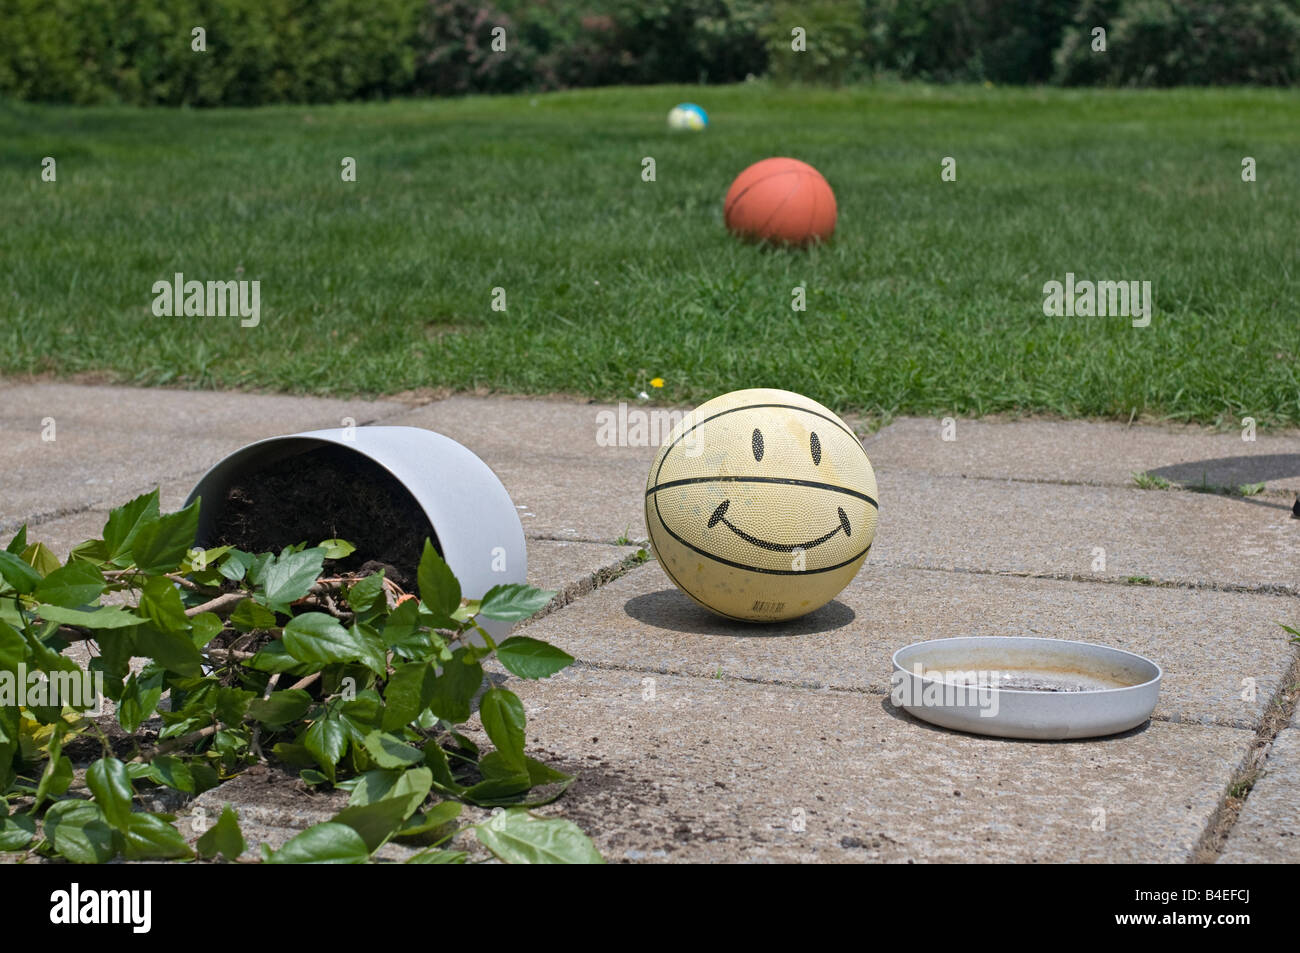 A potted plant on the paved ground spilled by a smiley ball. Stock Photo